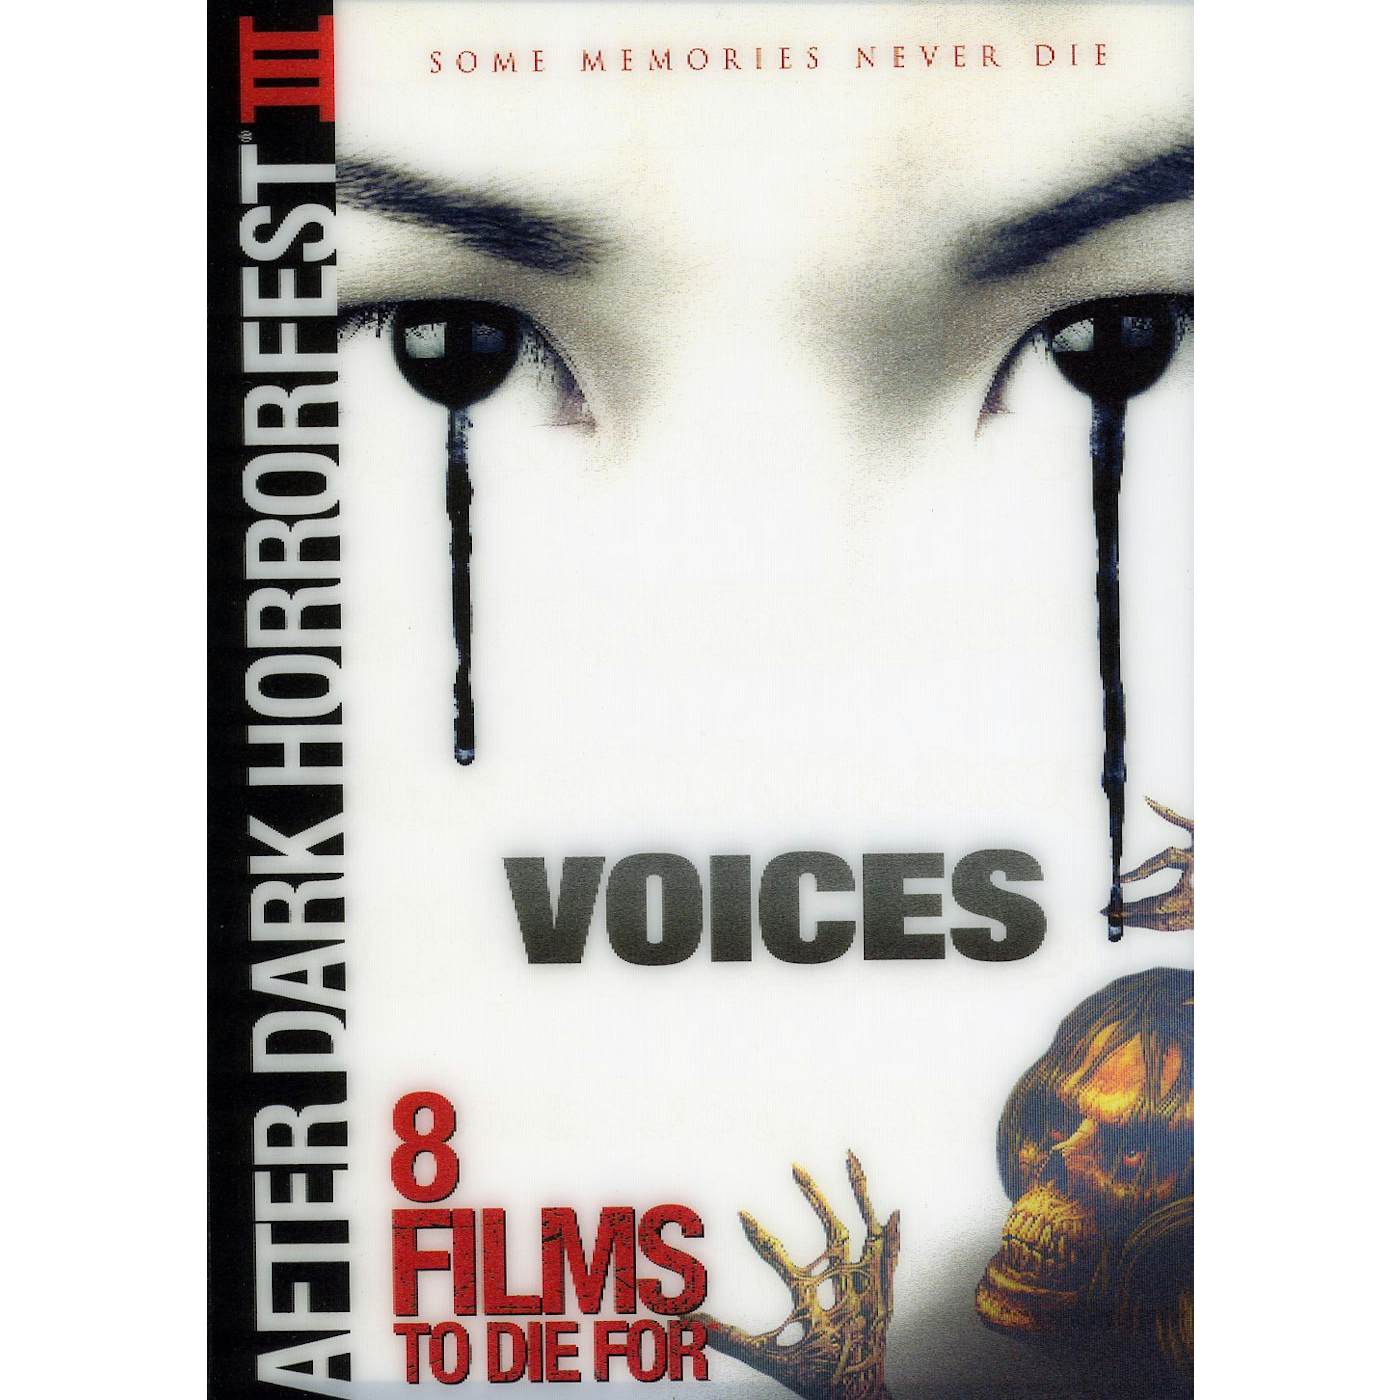 The Voices DVD